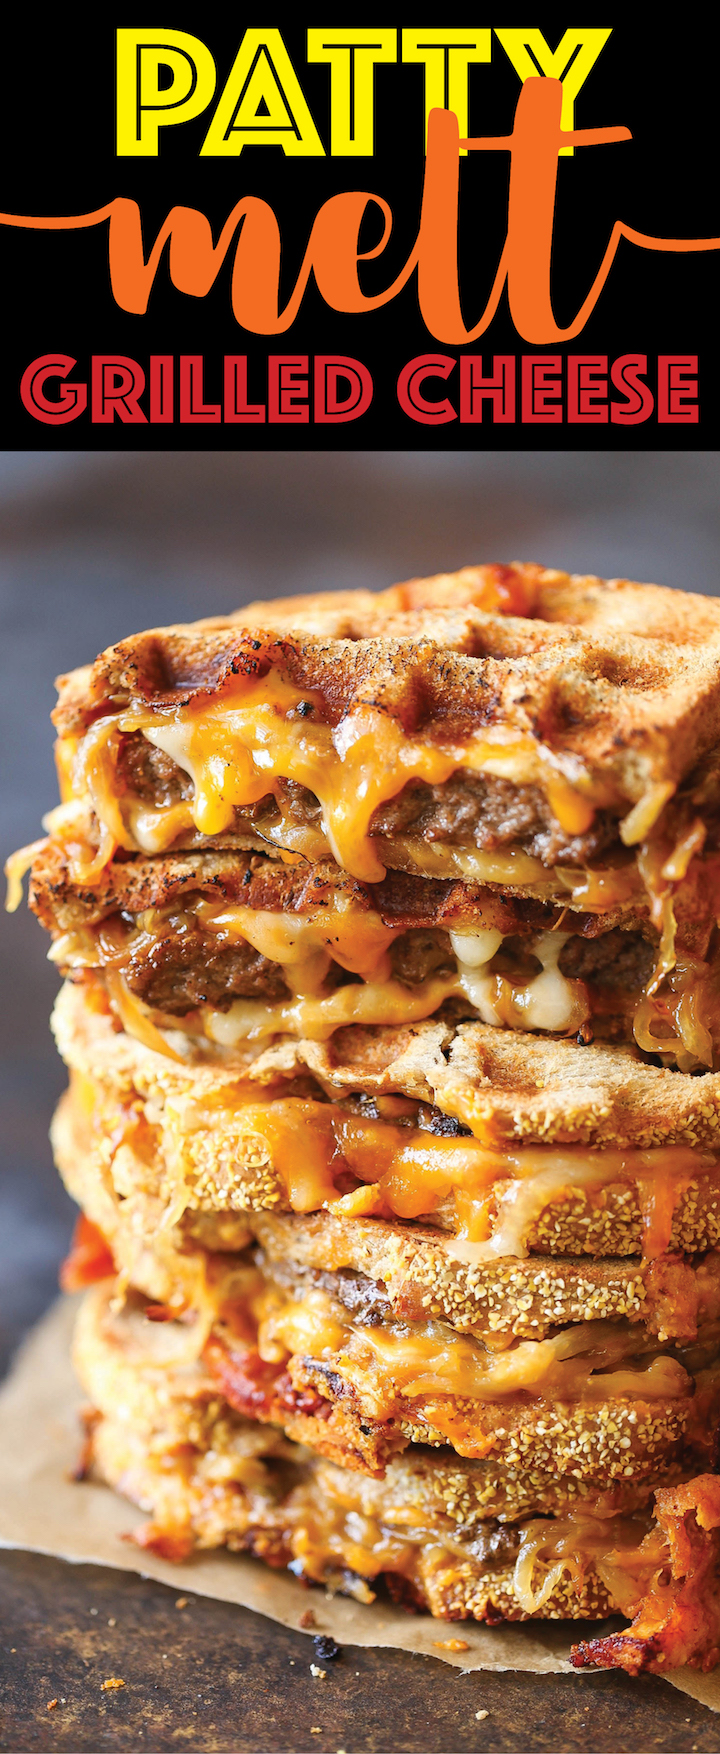 Patty Melt Grilled Cheese - A classic American diner sandwich, with melted cheesy goodness, a juicy patty and caramelized onions - made in a waffle maker!!!